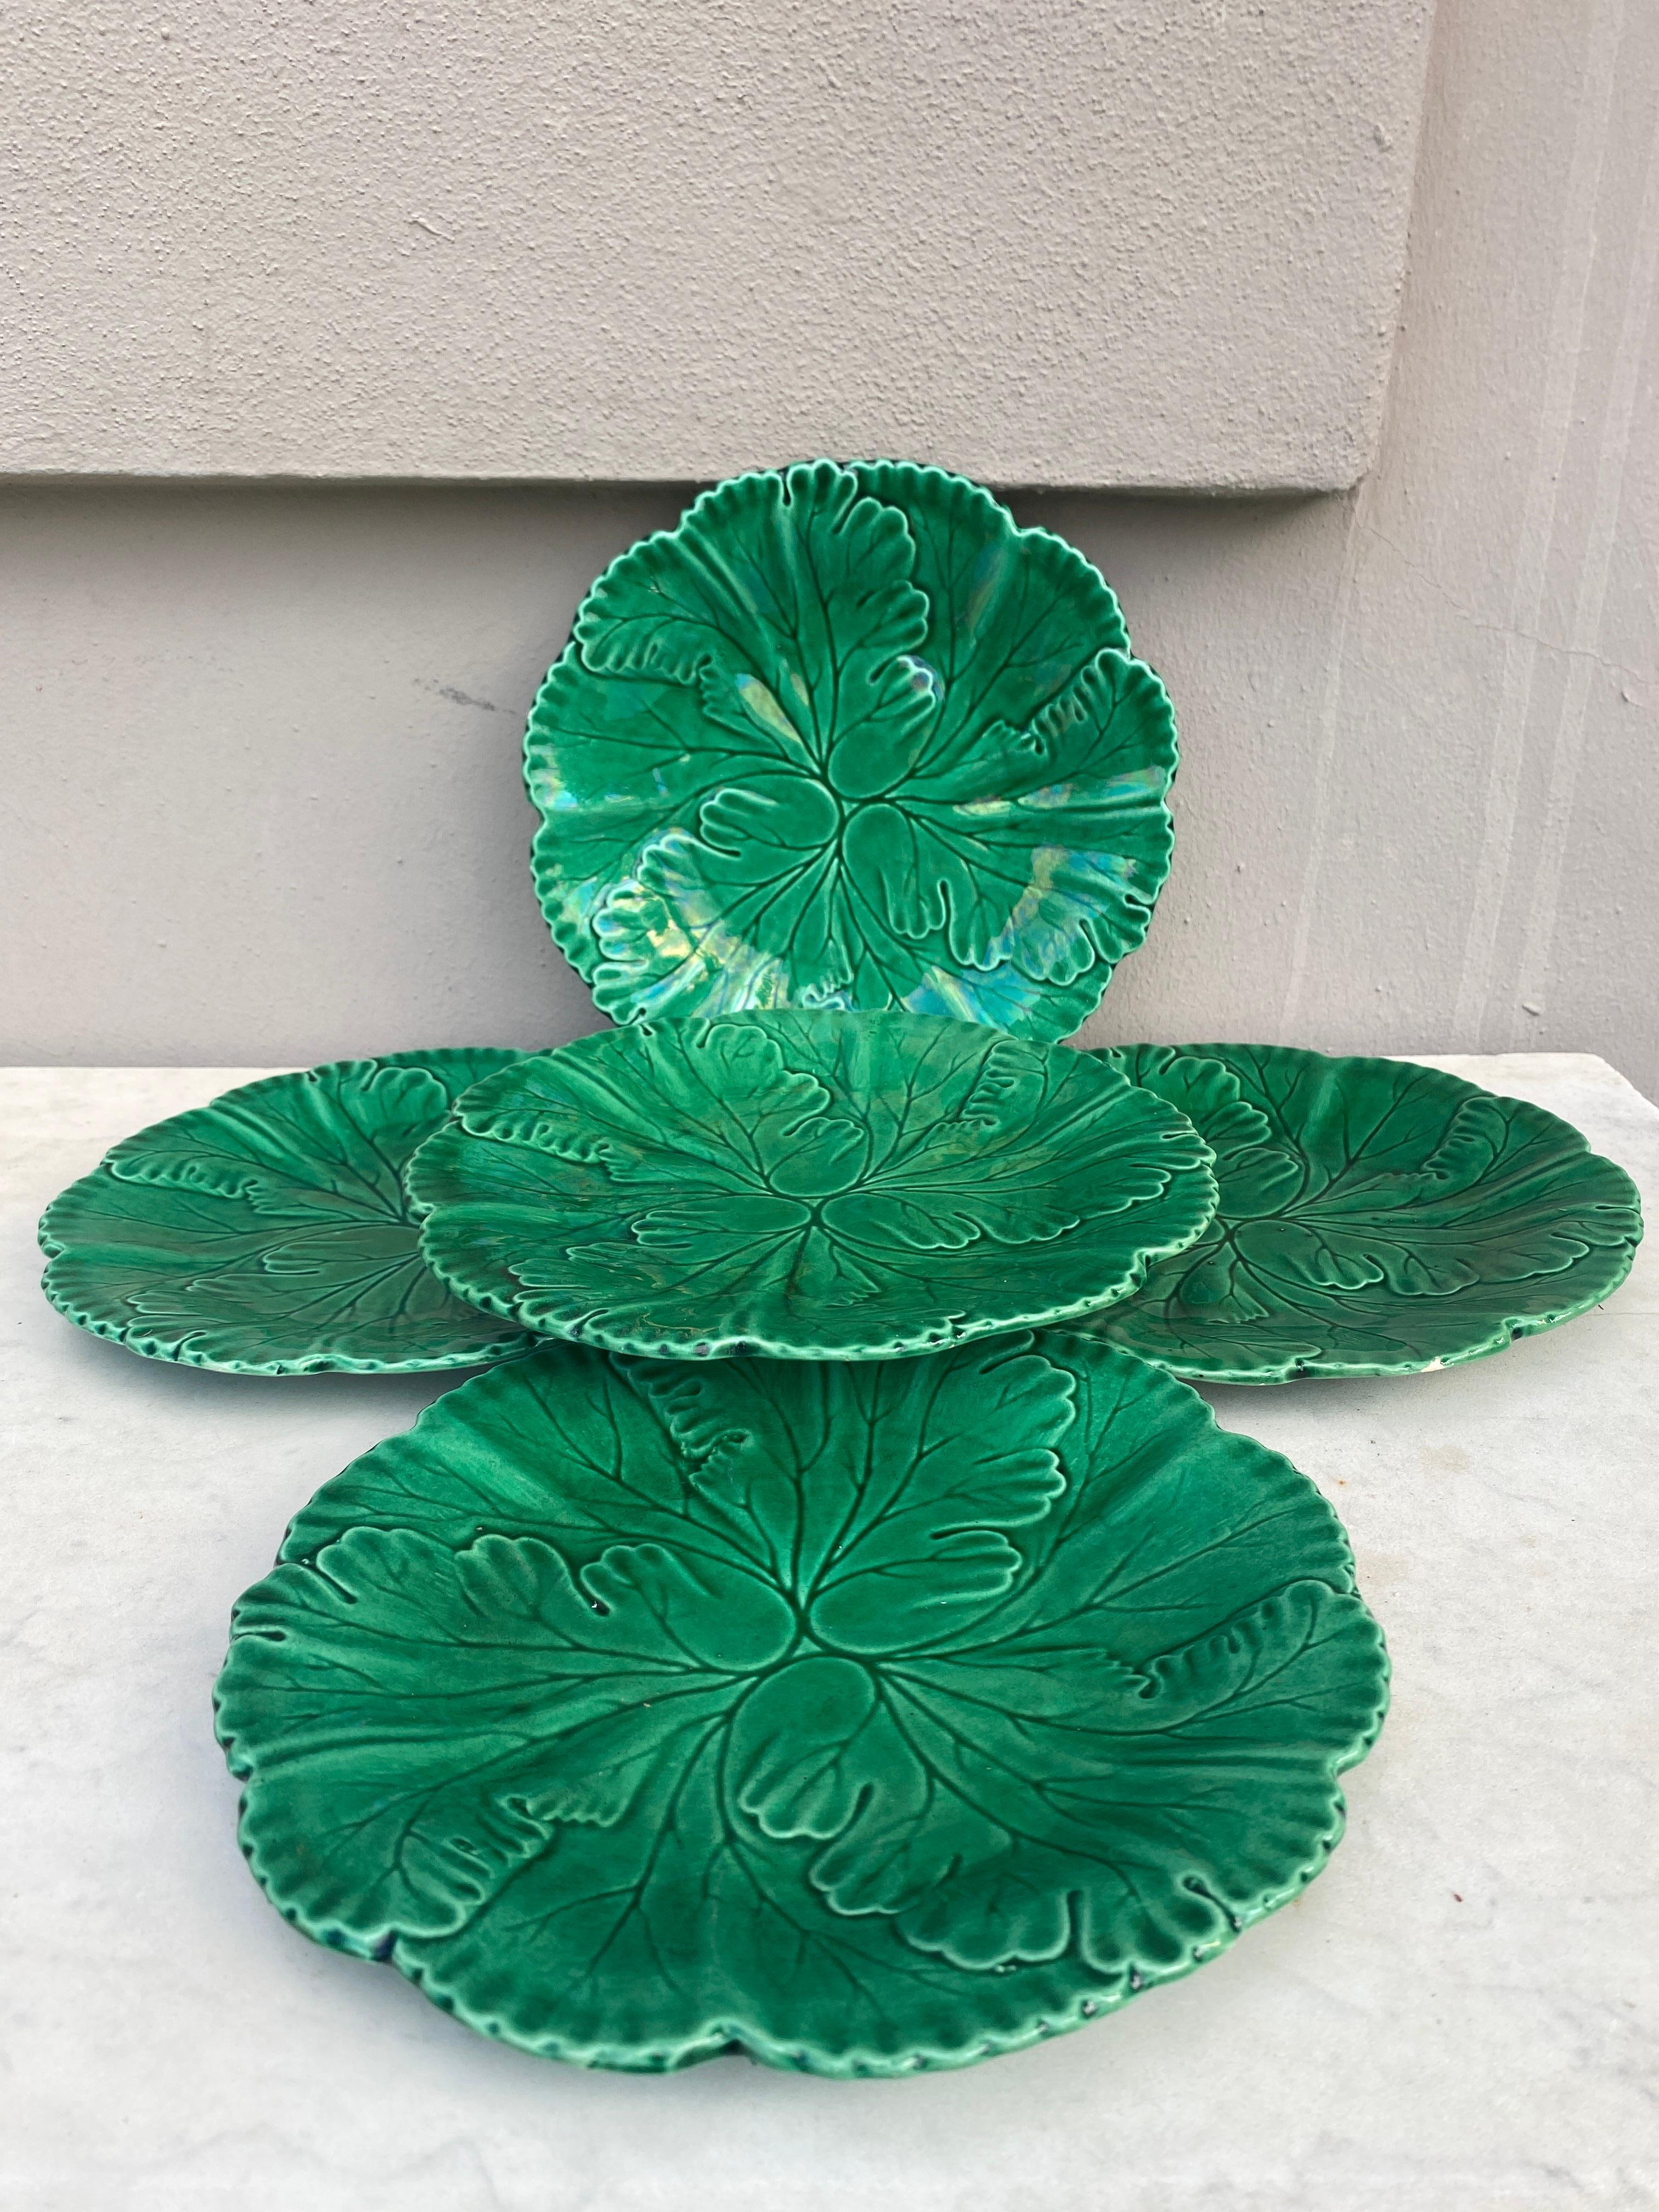 Rustic French Green Majolica Leaves Plate Clairefontaine, circa 1890 For Sale